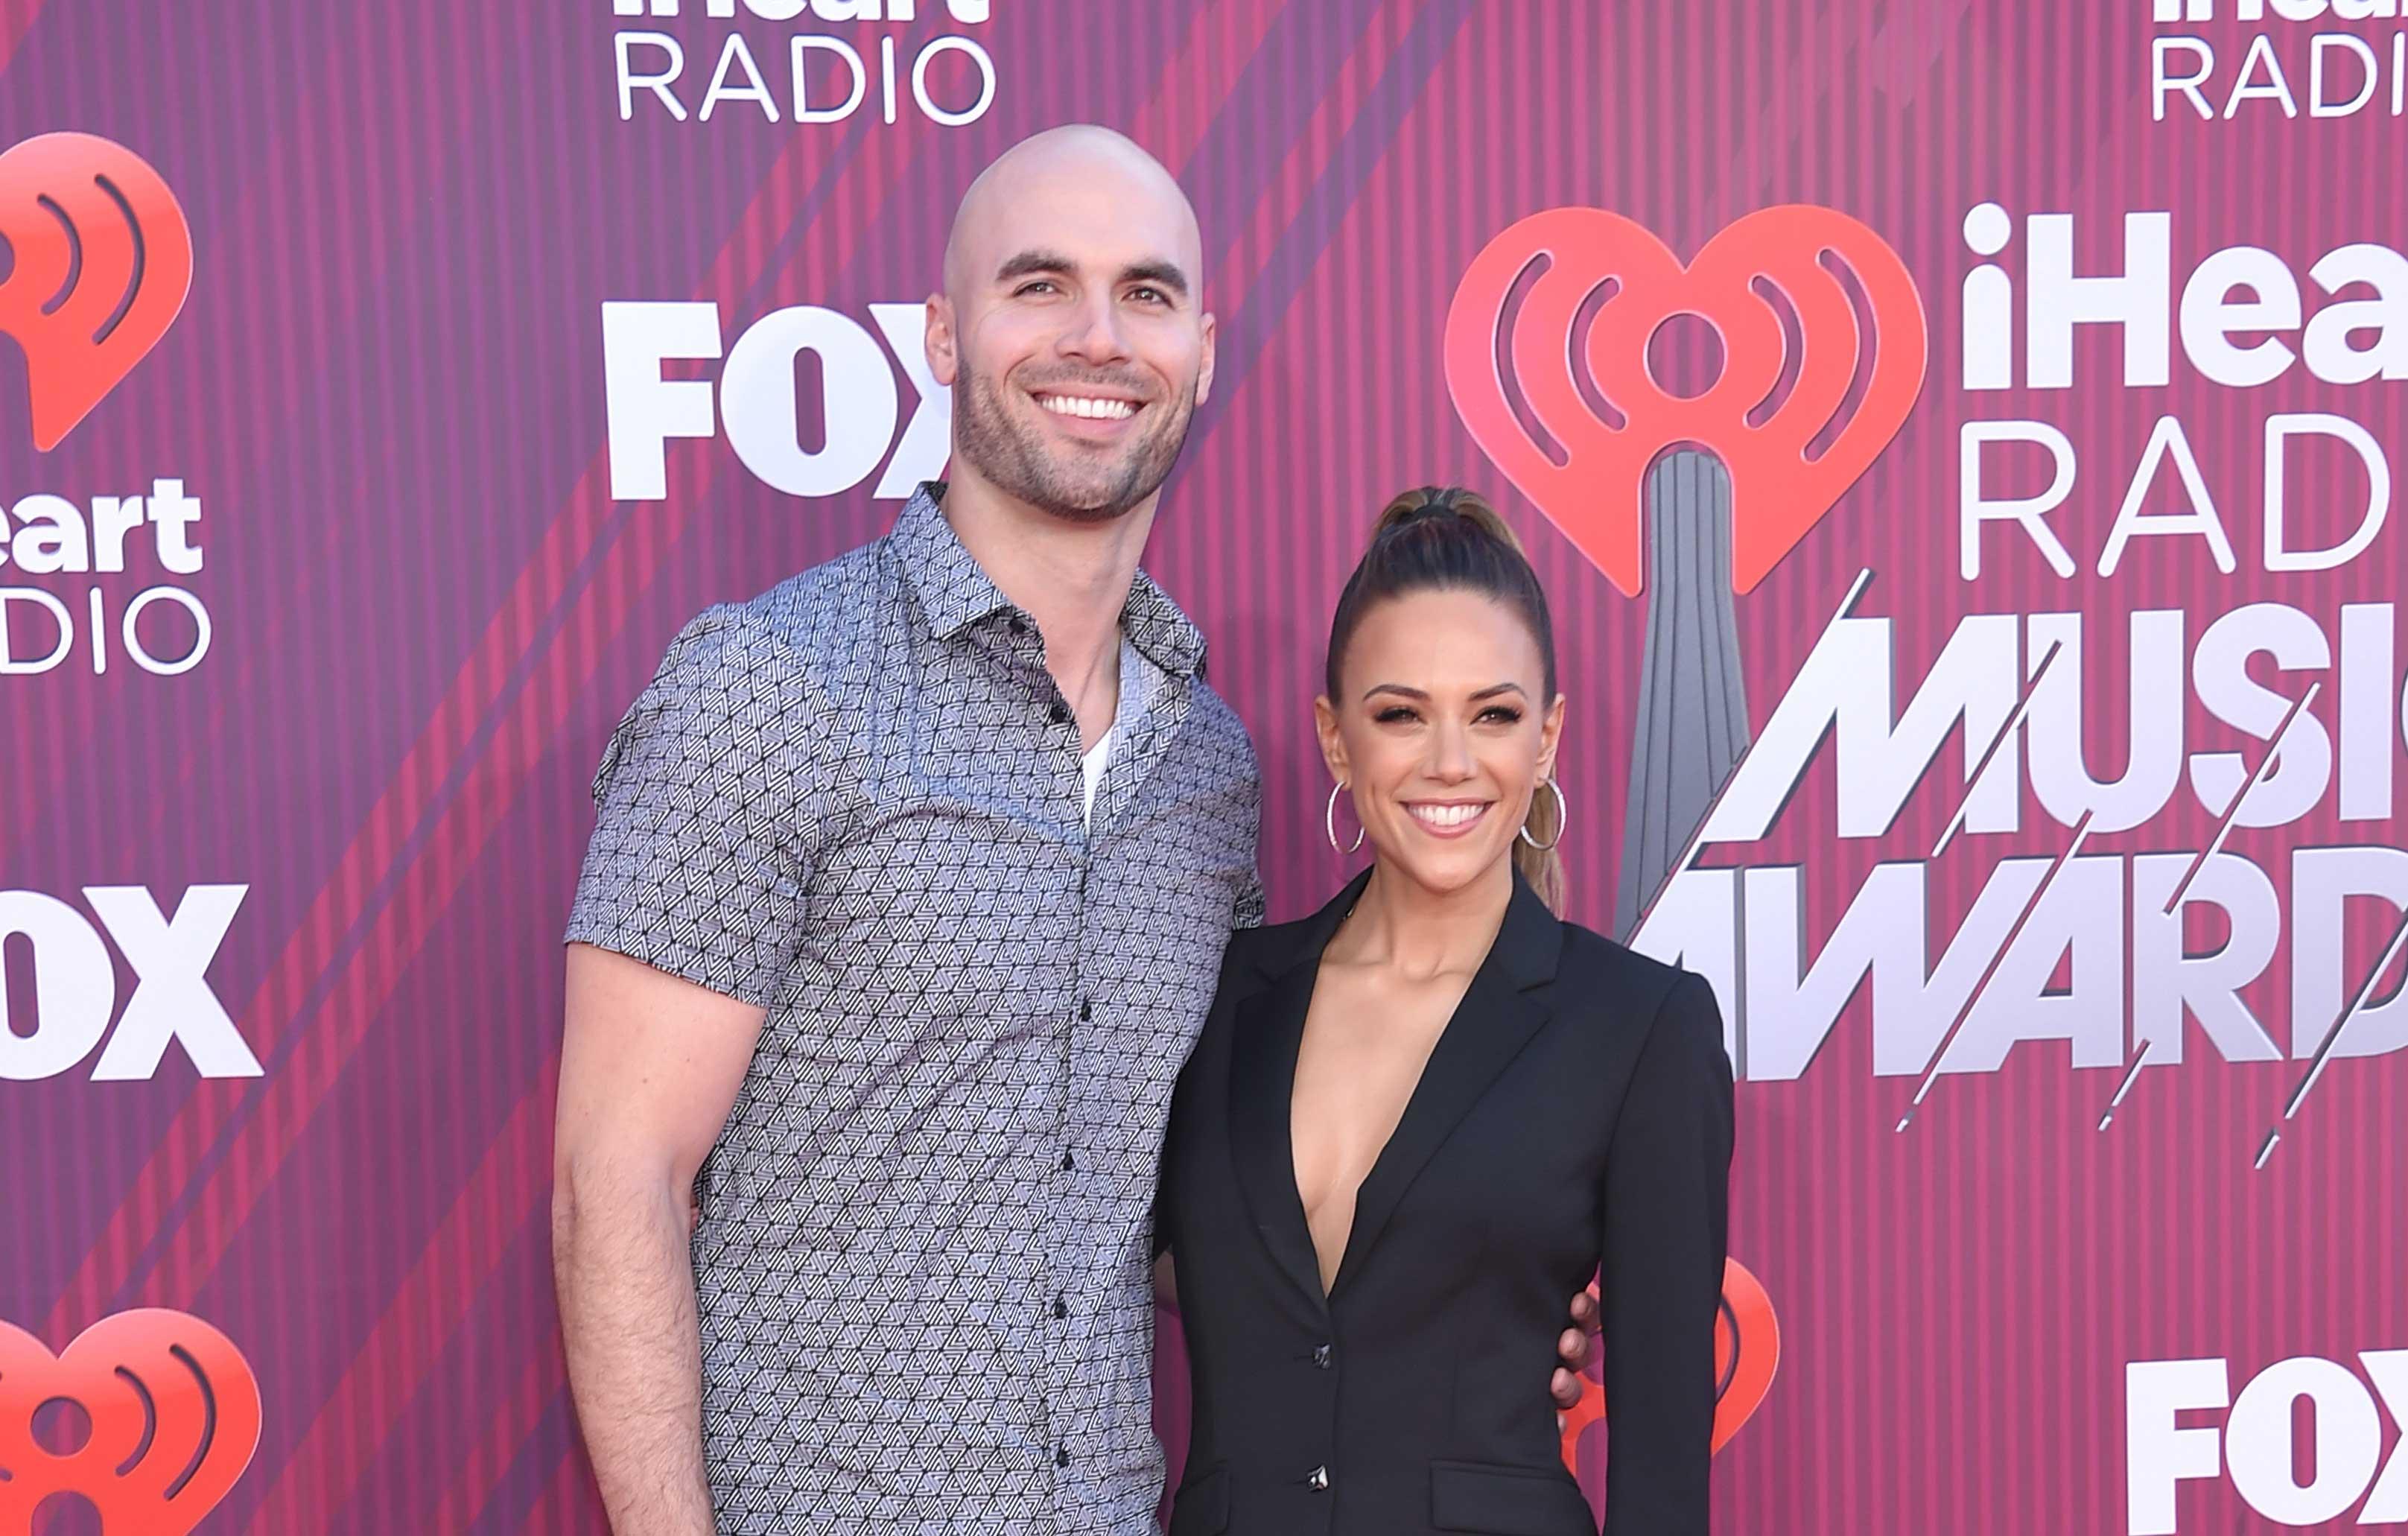 Jana Kramer Spills Shocking Detail About Mike Caussin Sex Life photo picture